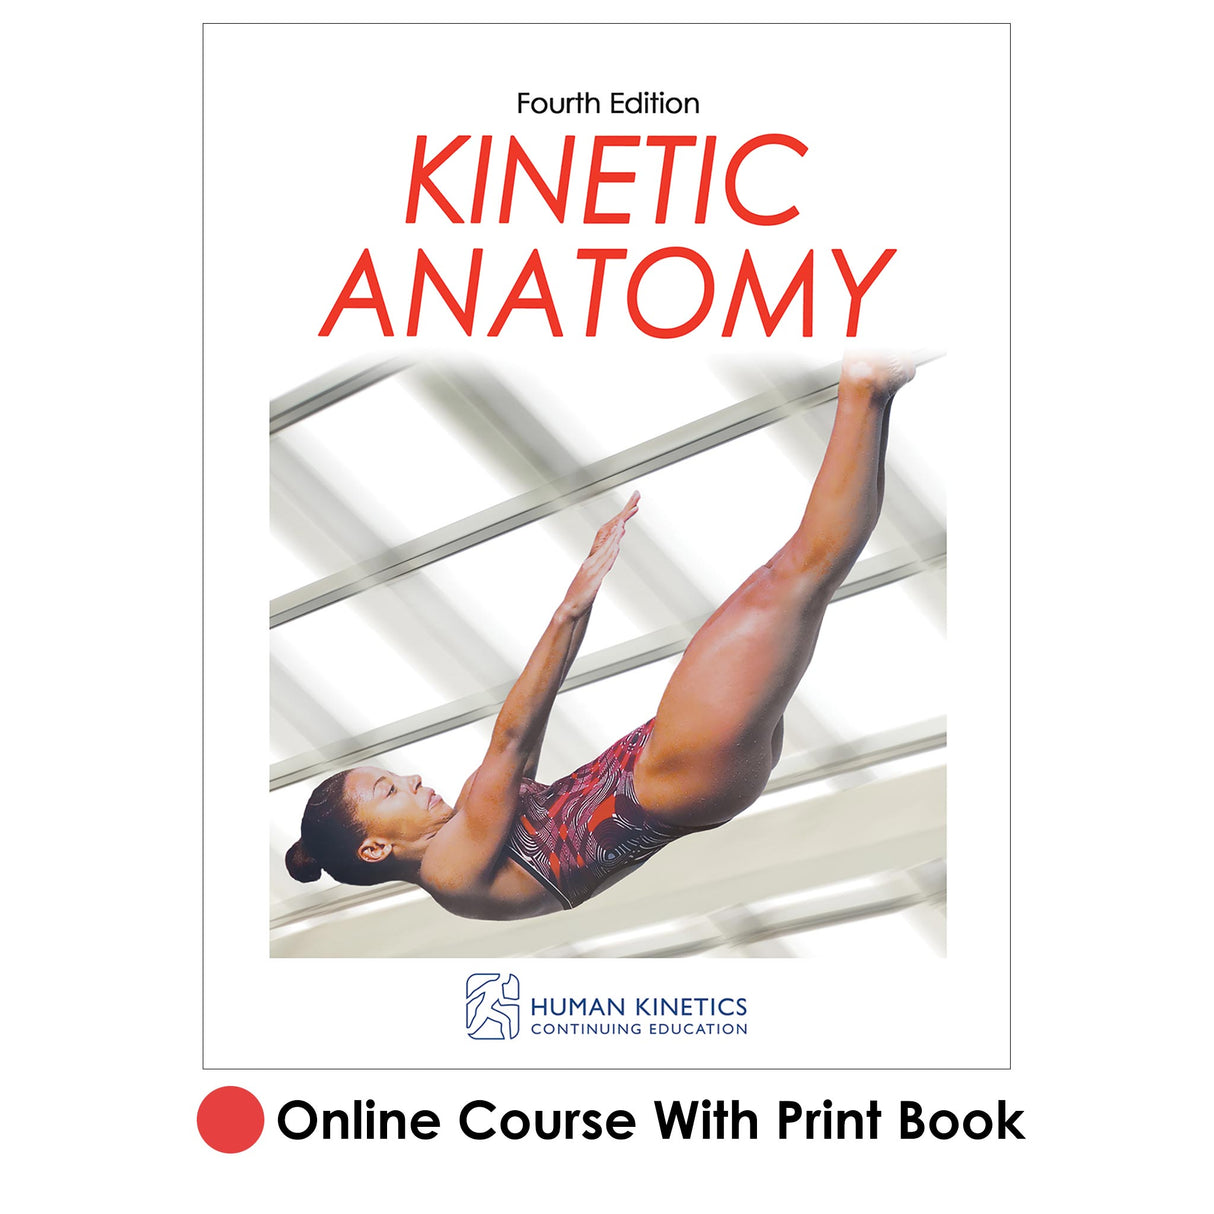 Kinetic Anatomy 4th Edition Online CE Course With Print Book